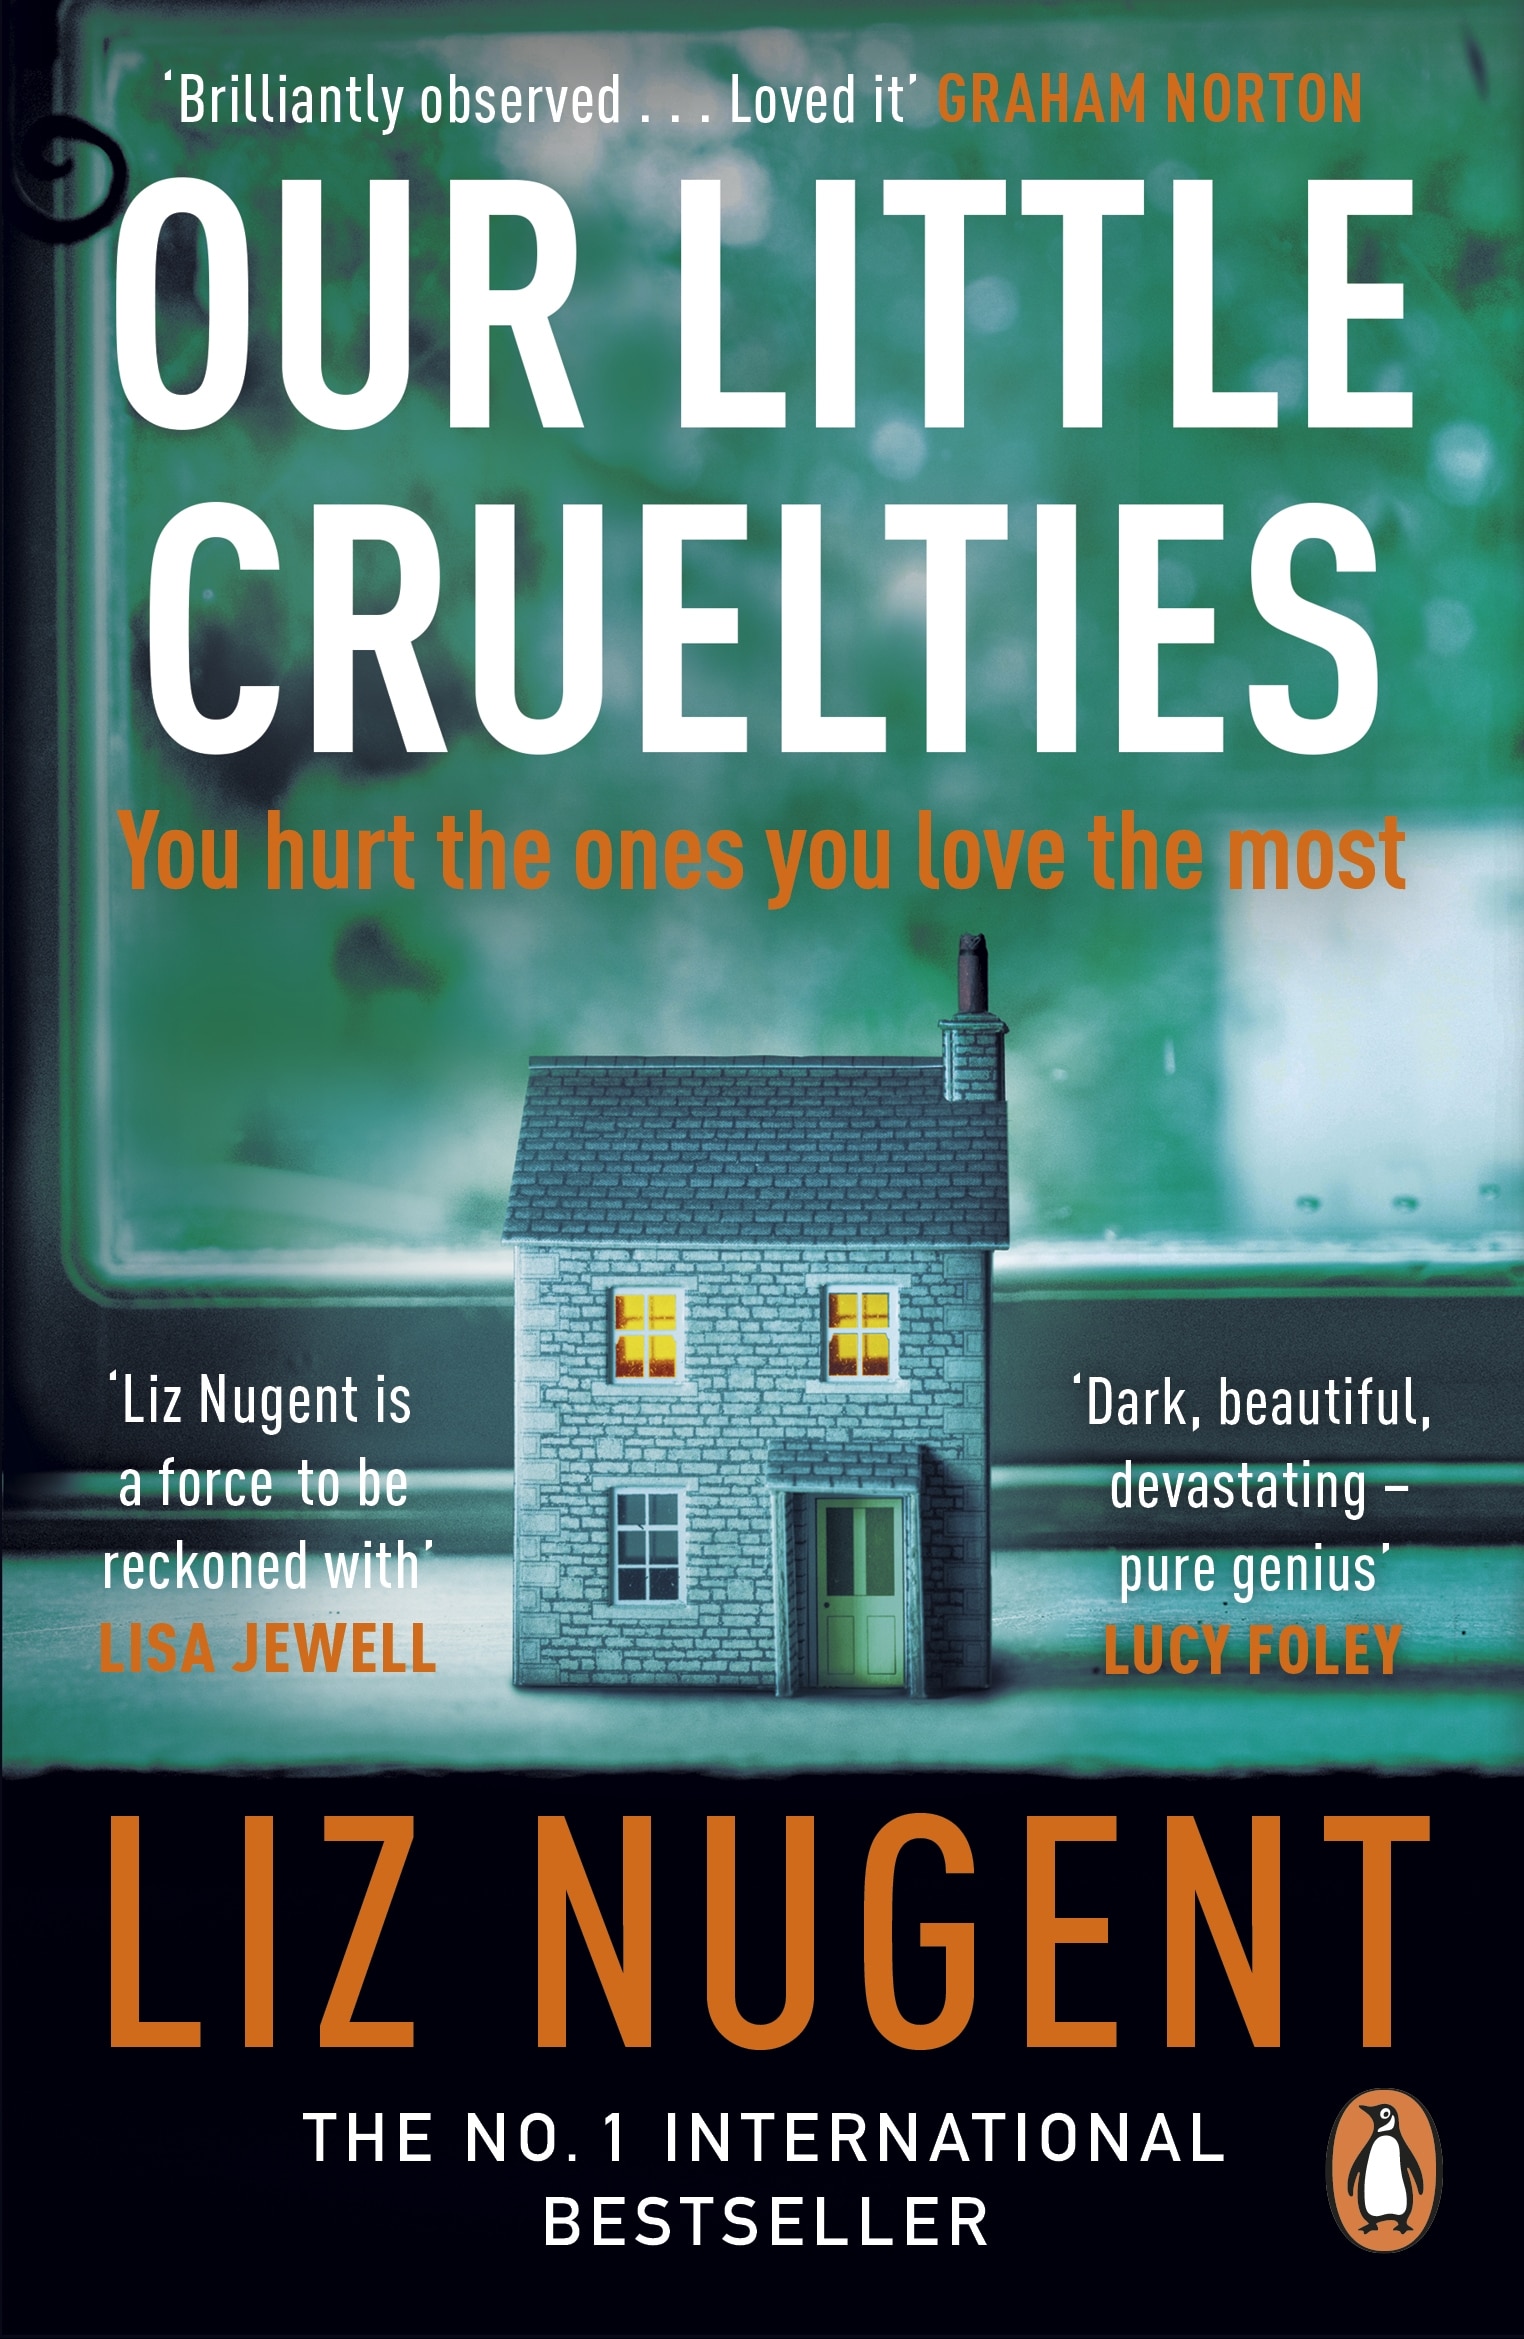 Book jacket of Our Little Cruelties by Liz Nugent, one of the best books out this month